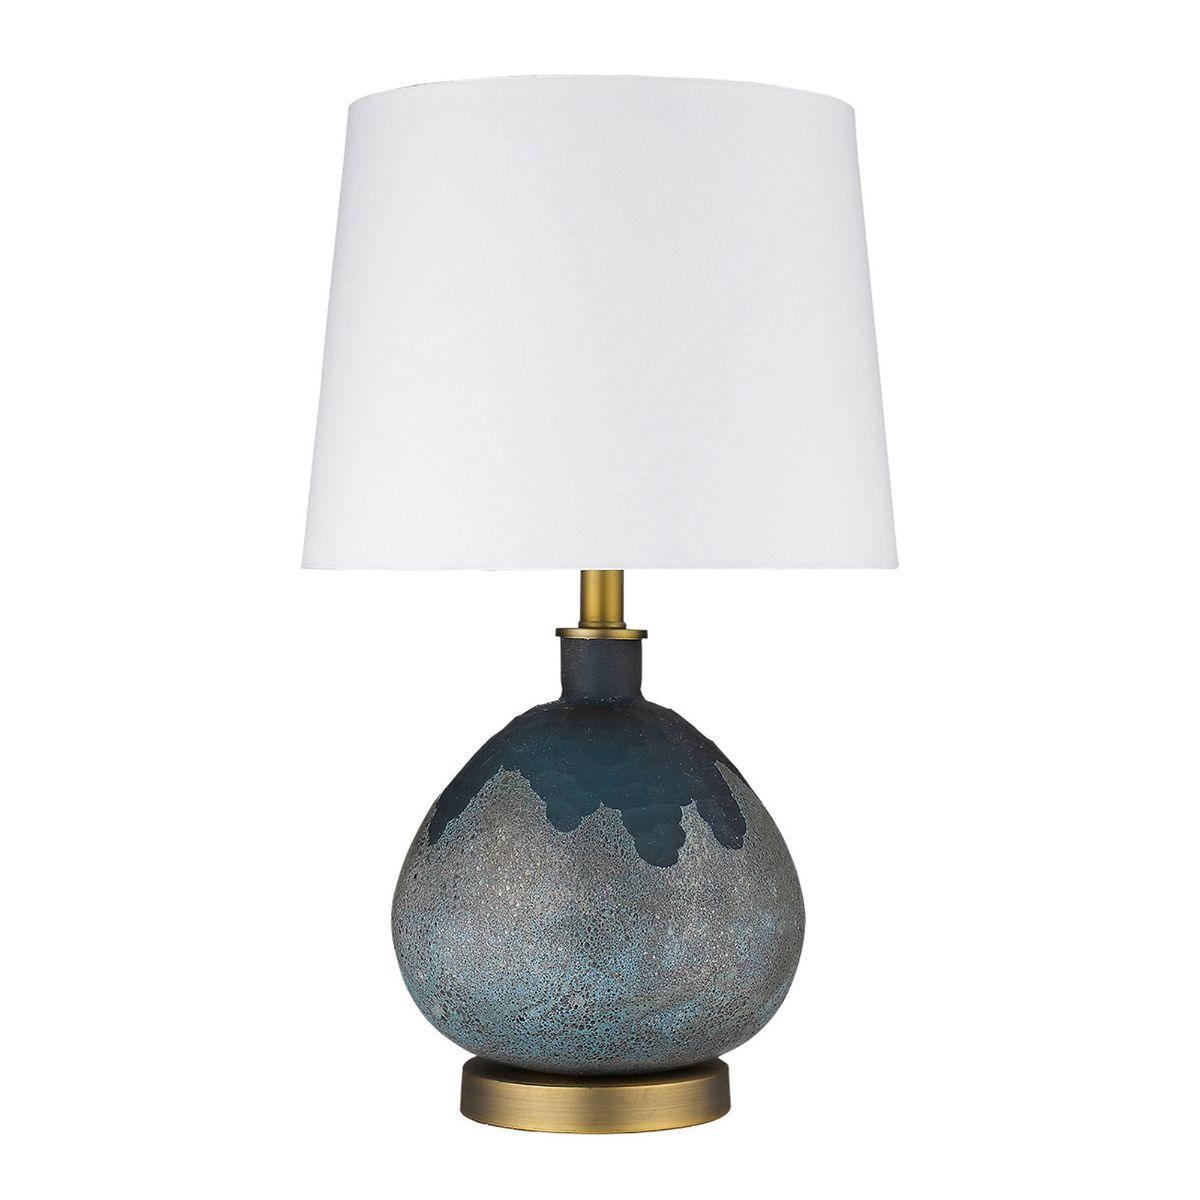 Trend Home 1 Light 22 inches Table Lamp Blue/Brown Glass Body and Brass Accents